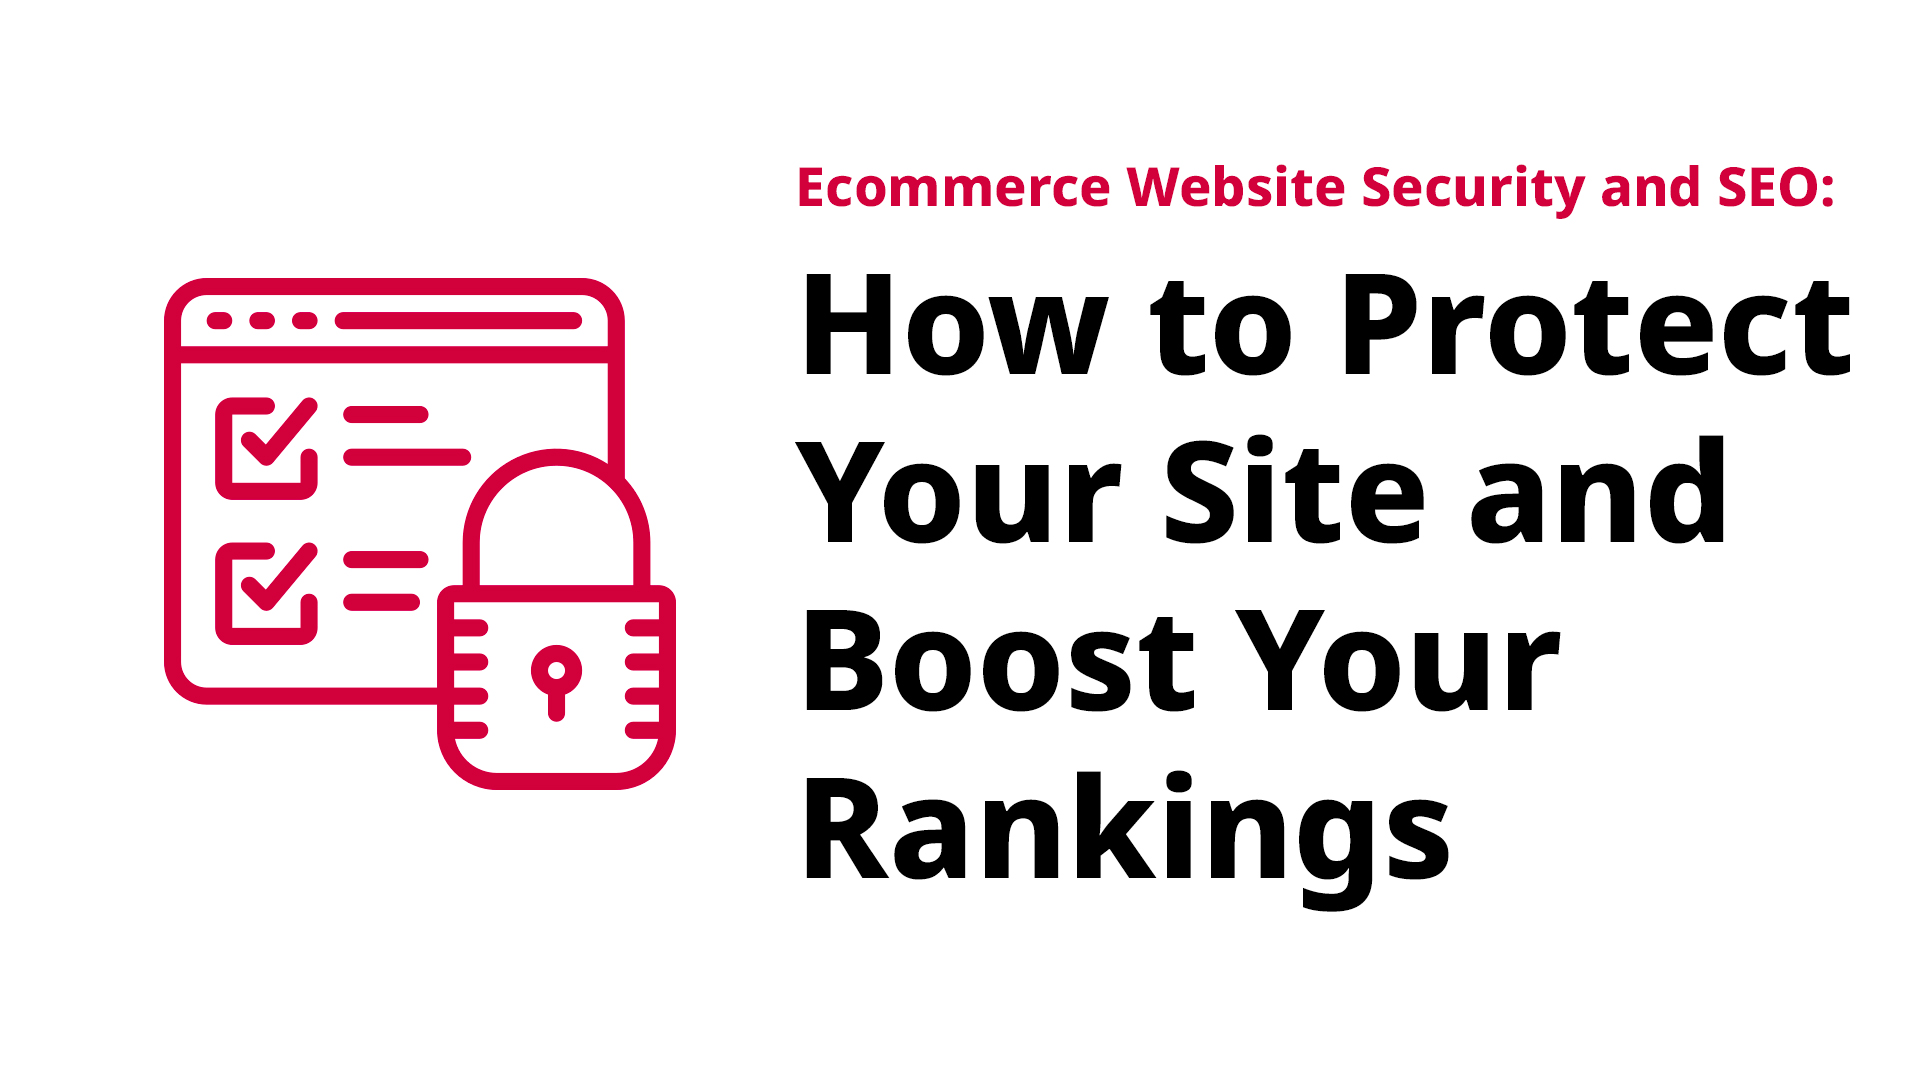 Ecommerce Website Security and SEO: How to Protect Your Site and Boost Your Rankings